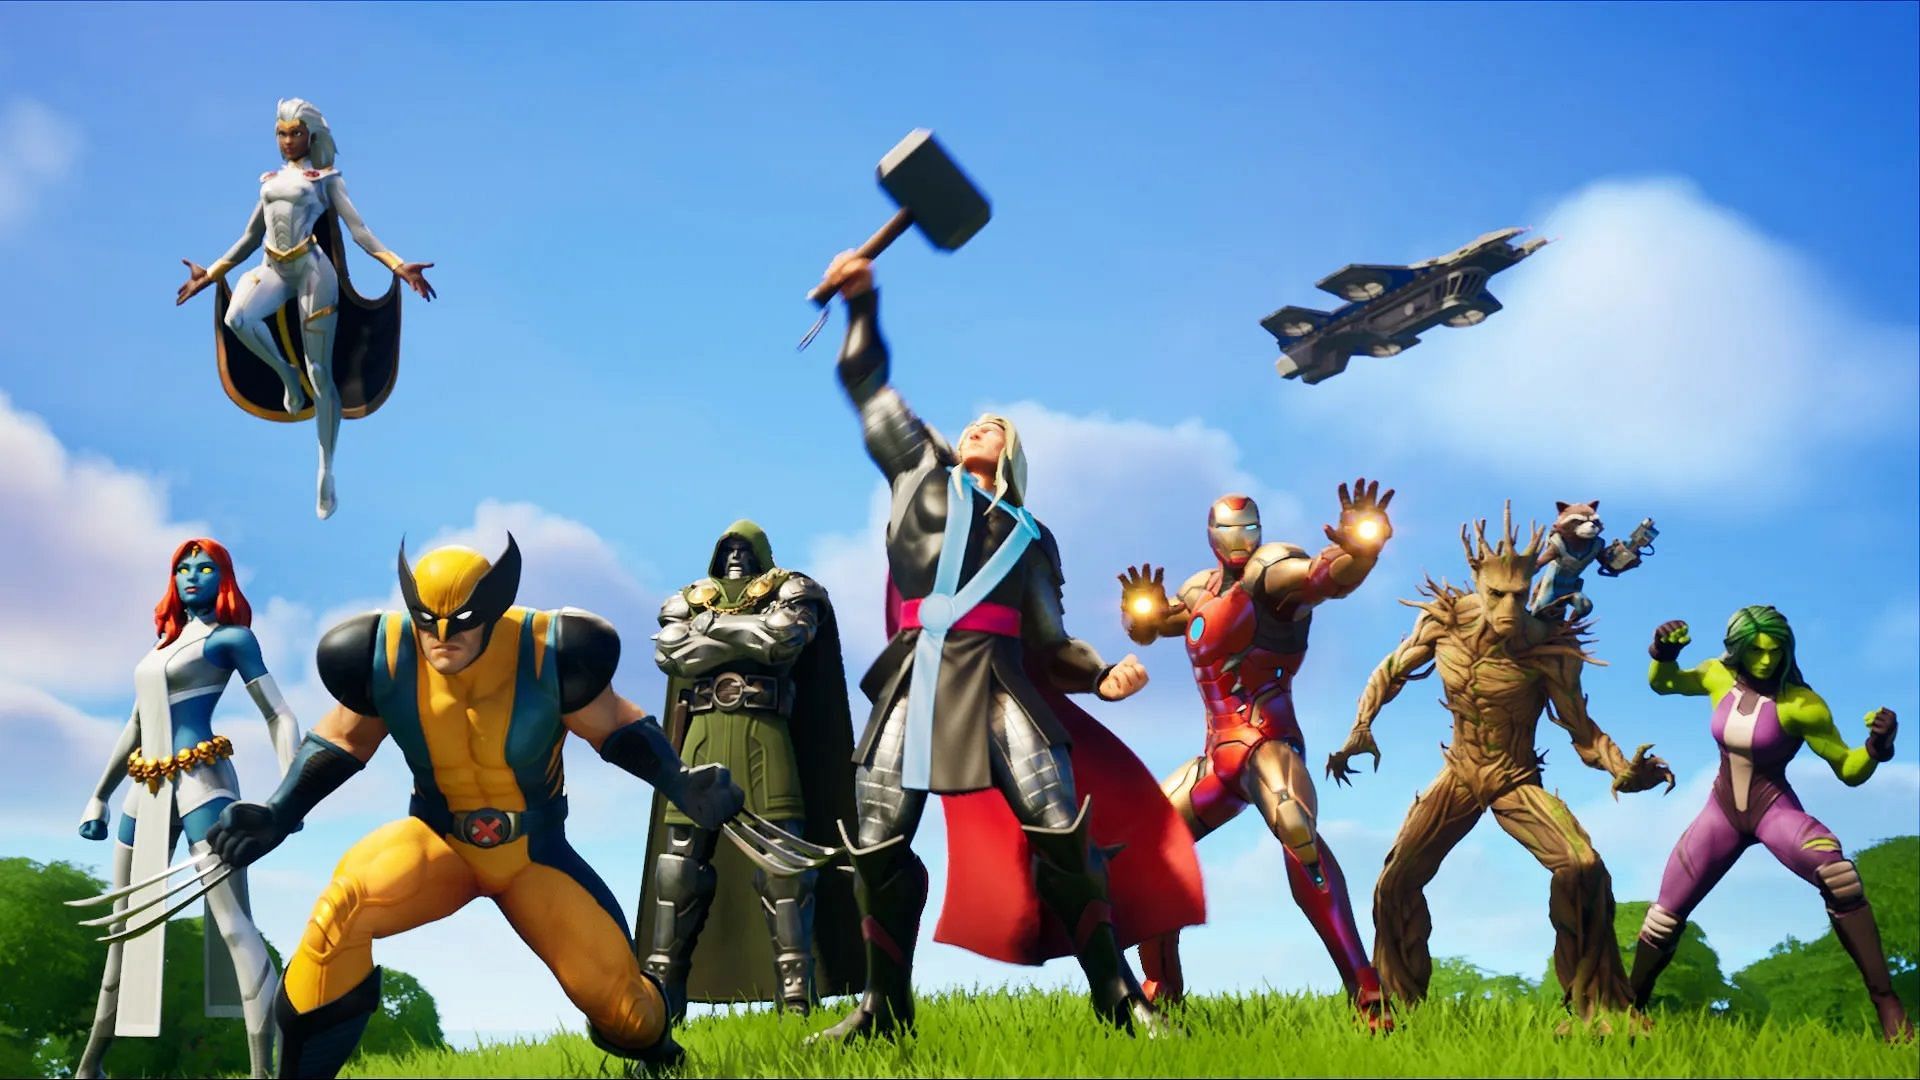 Epic Games may release another Marvel season for Fortnite Battle Royale (Image via Epic Games)